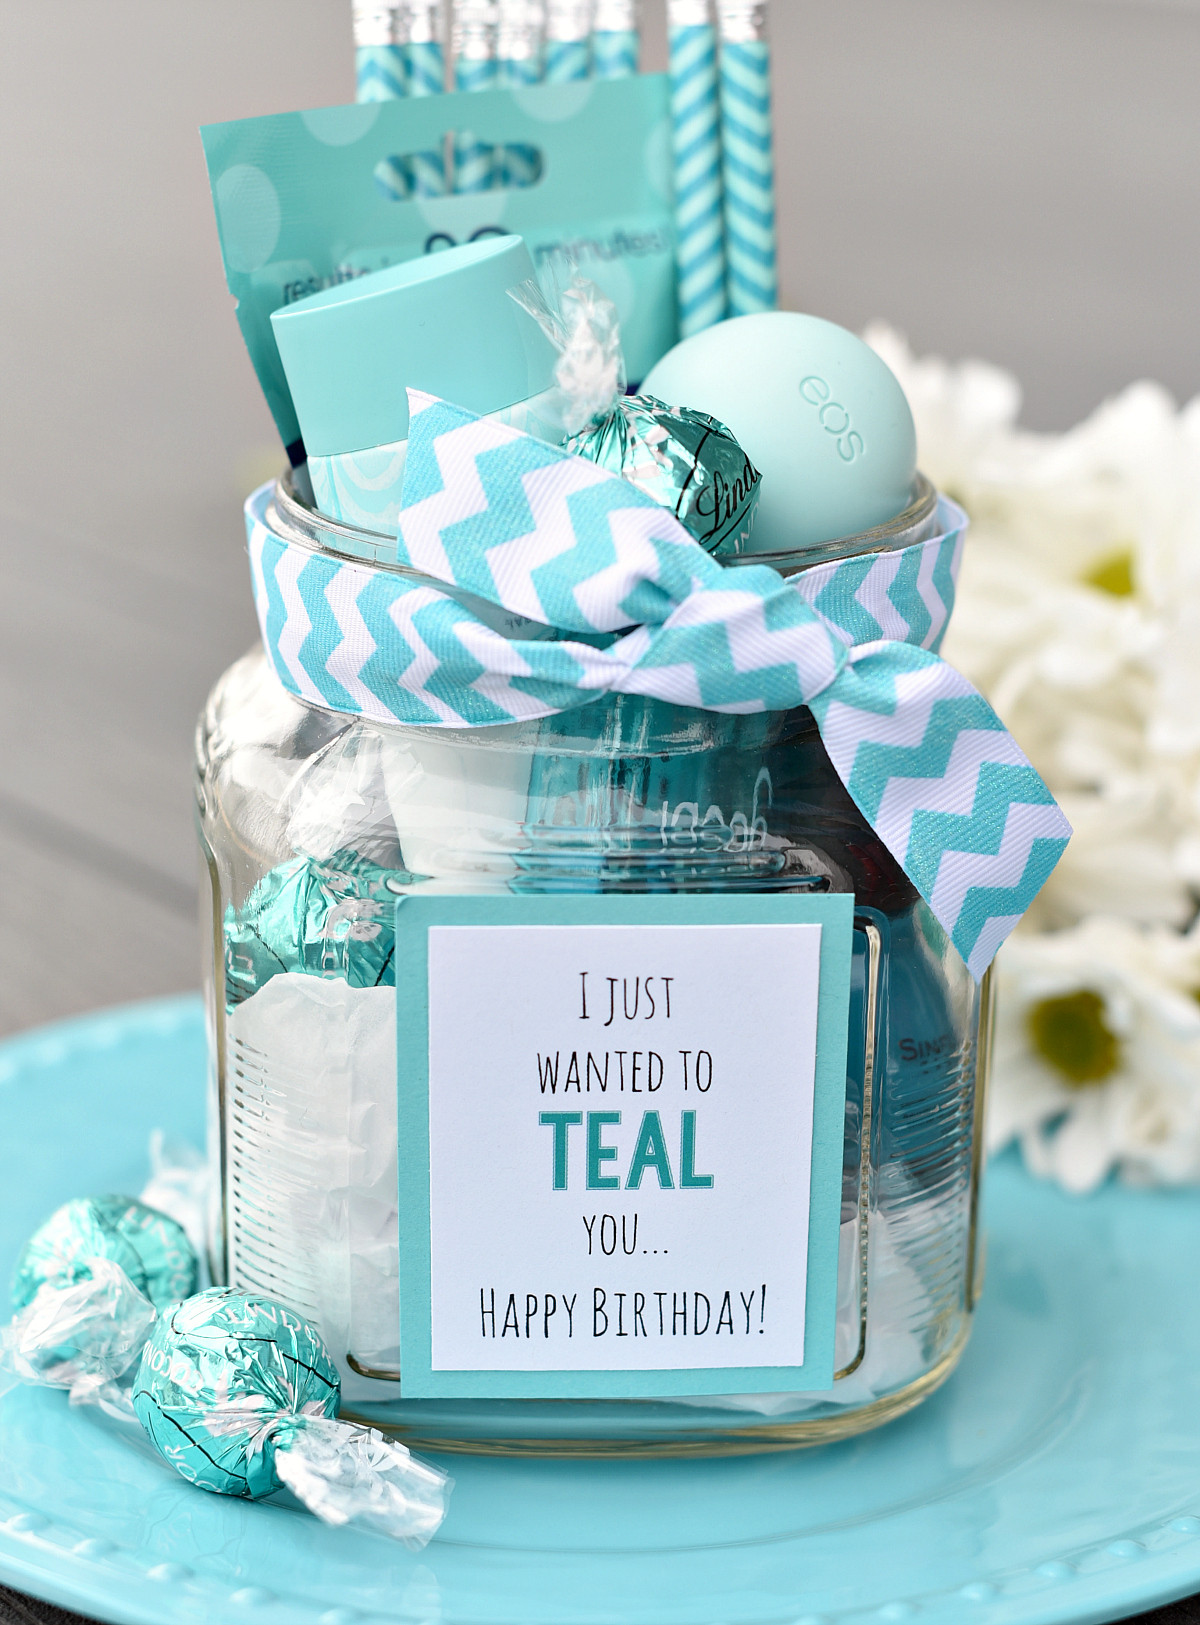 Best Friends Gift Ideas
 Teal Birthday Gift Idea for Friends – Fun Squared